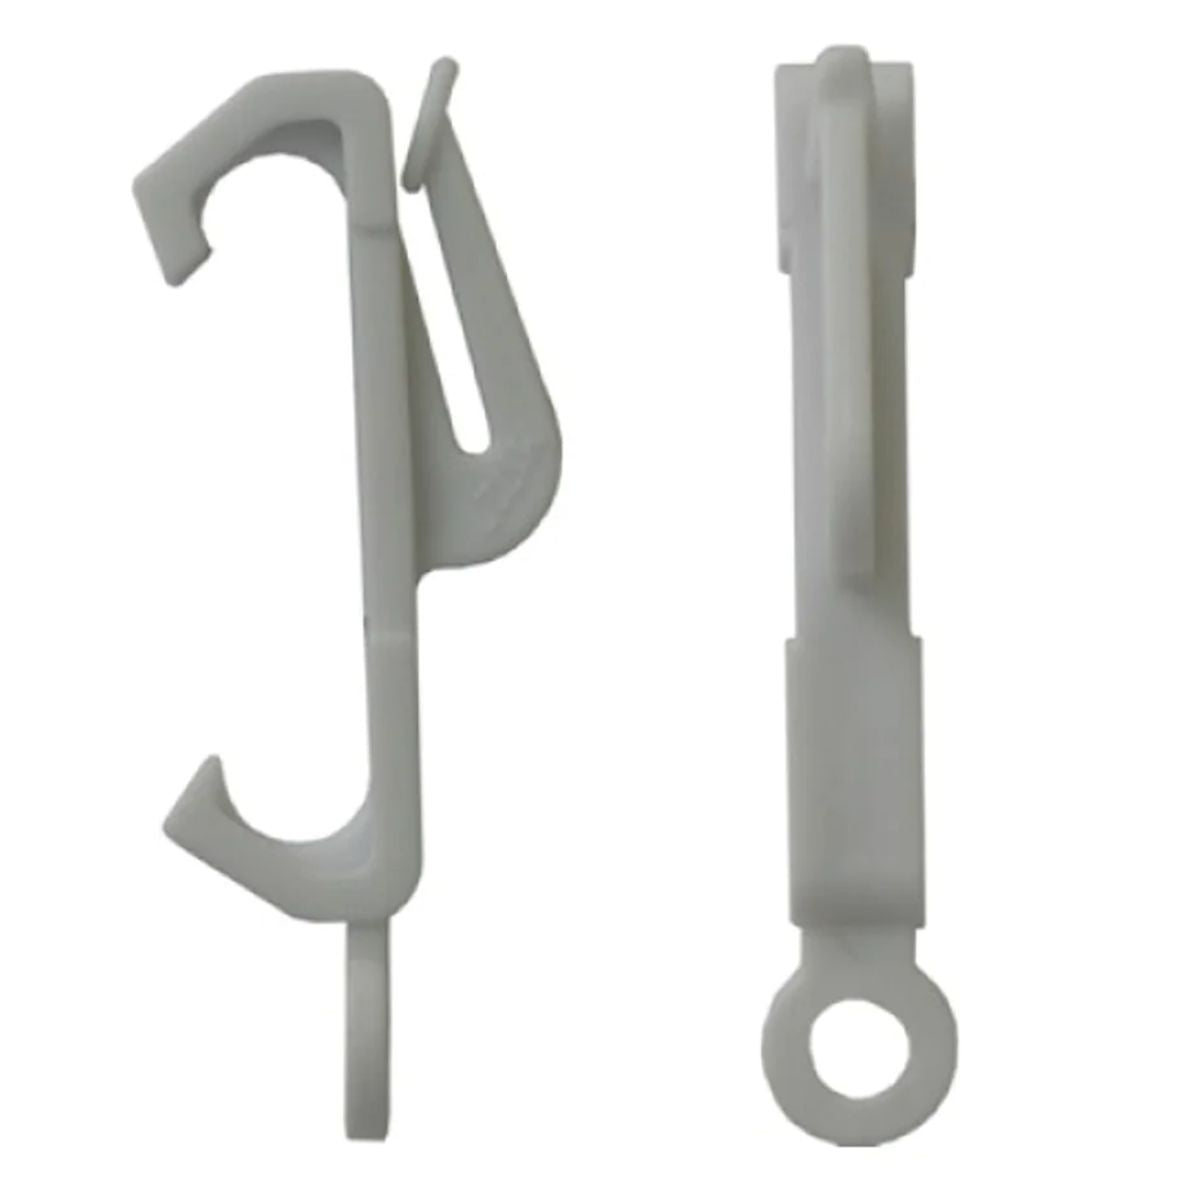 Two Value Pack - Drape Elegance Curtain Hooks displayed, one viewed from the front and the other from the side.